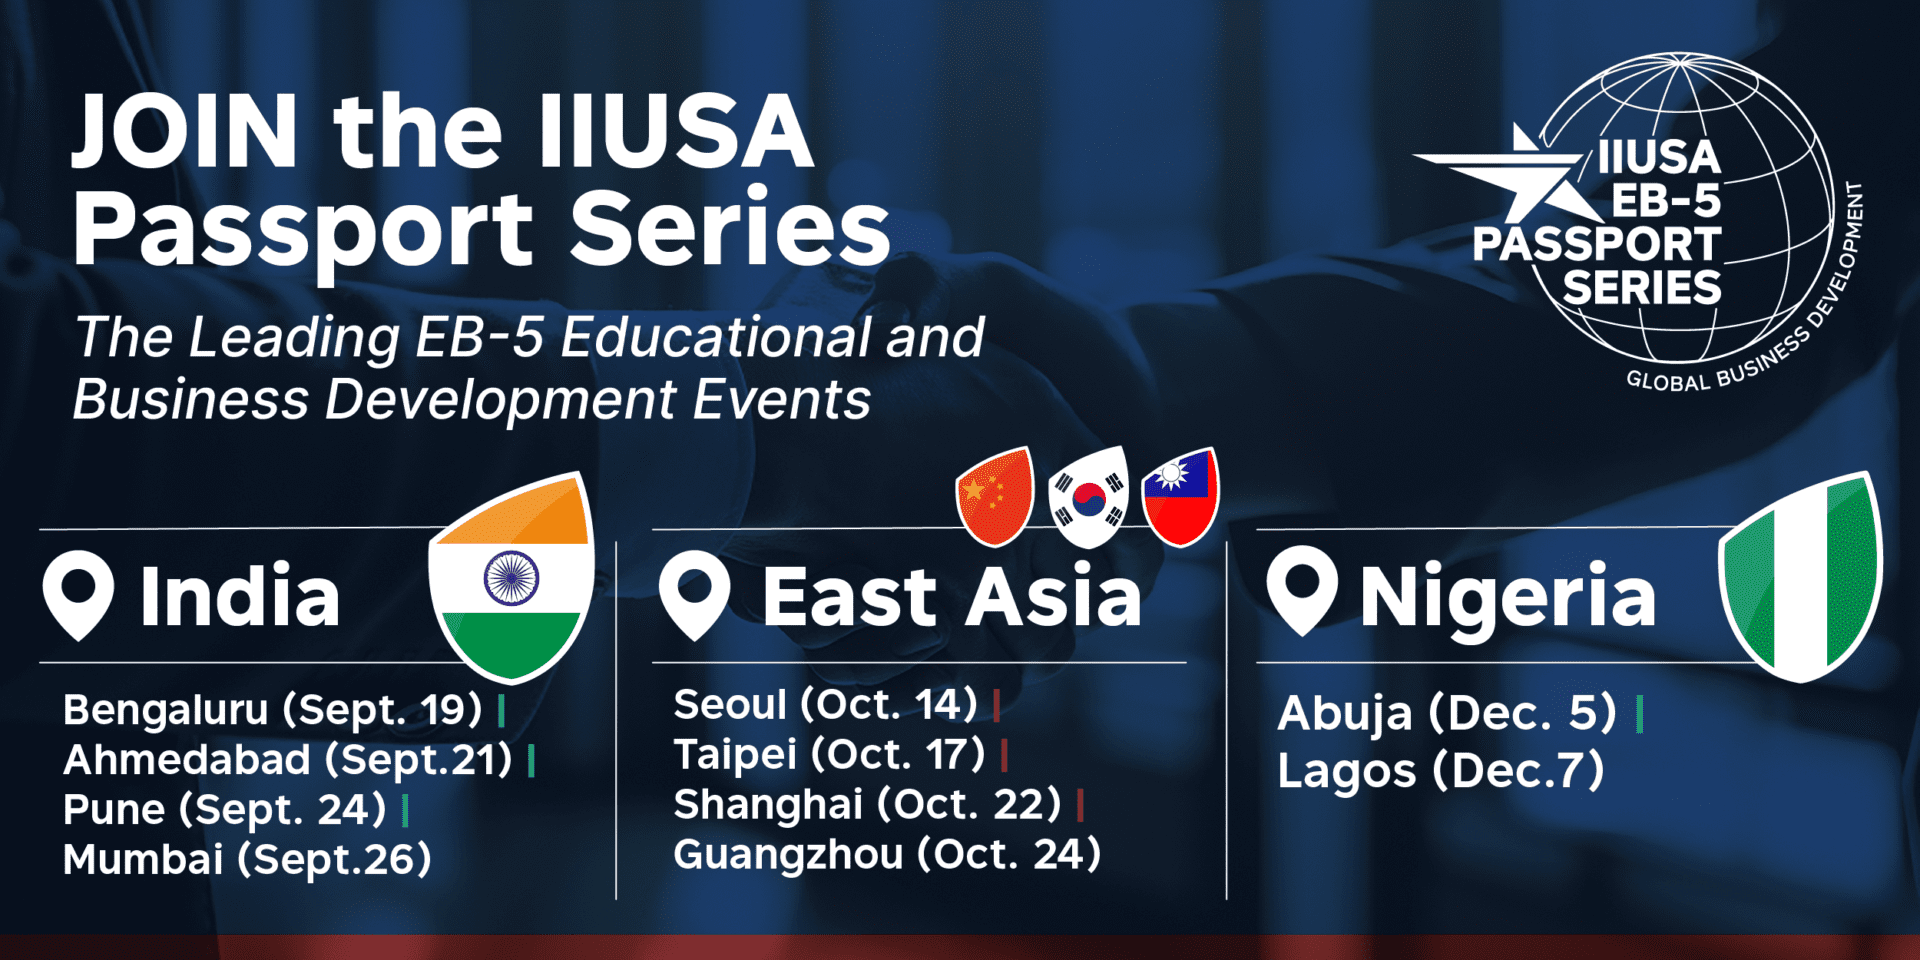 Announcing the Upcoming IIUSA Passport Series Schedule of Events